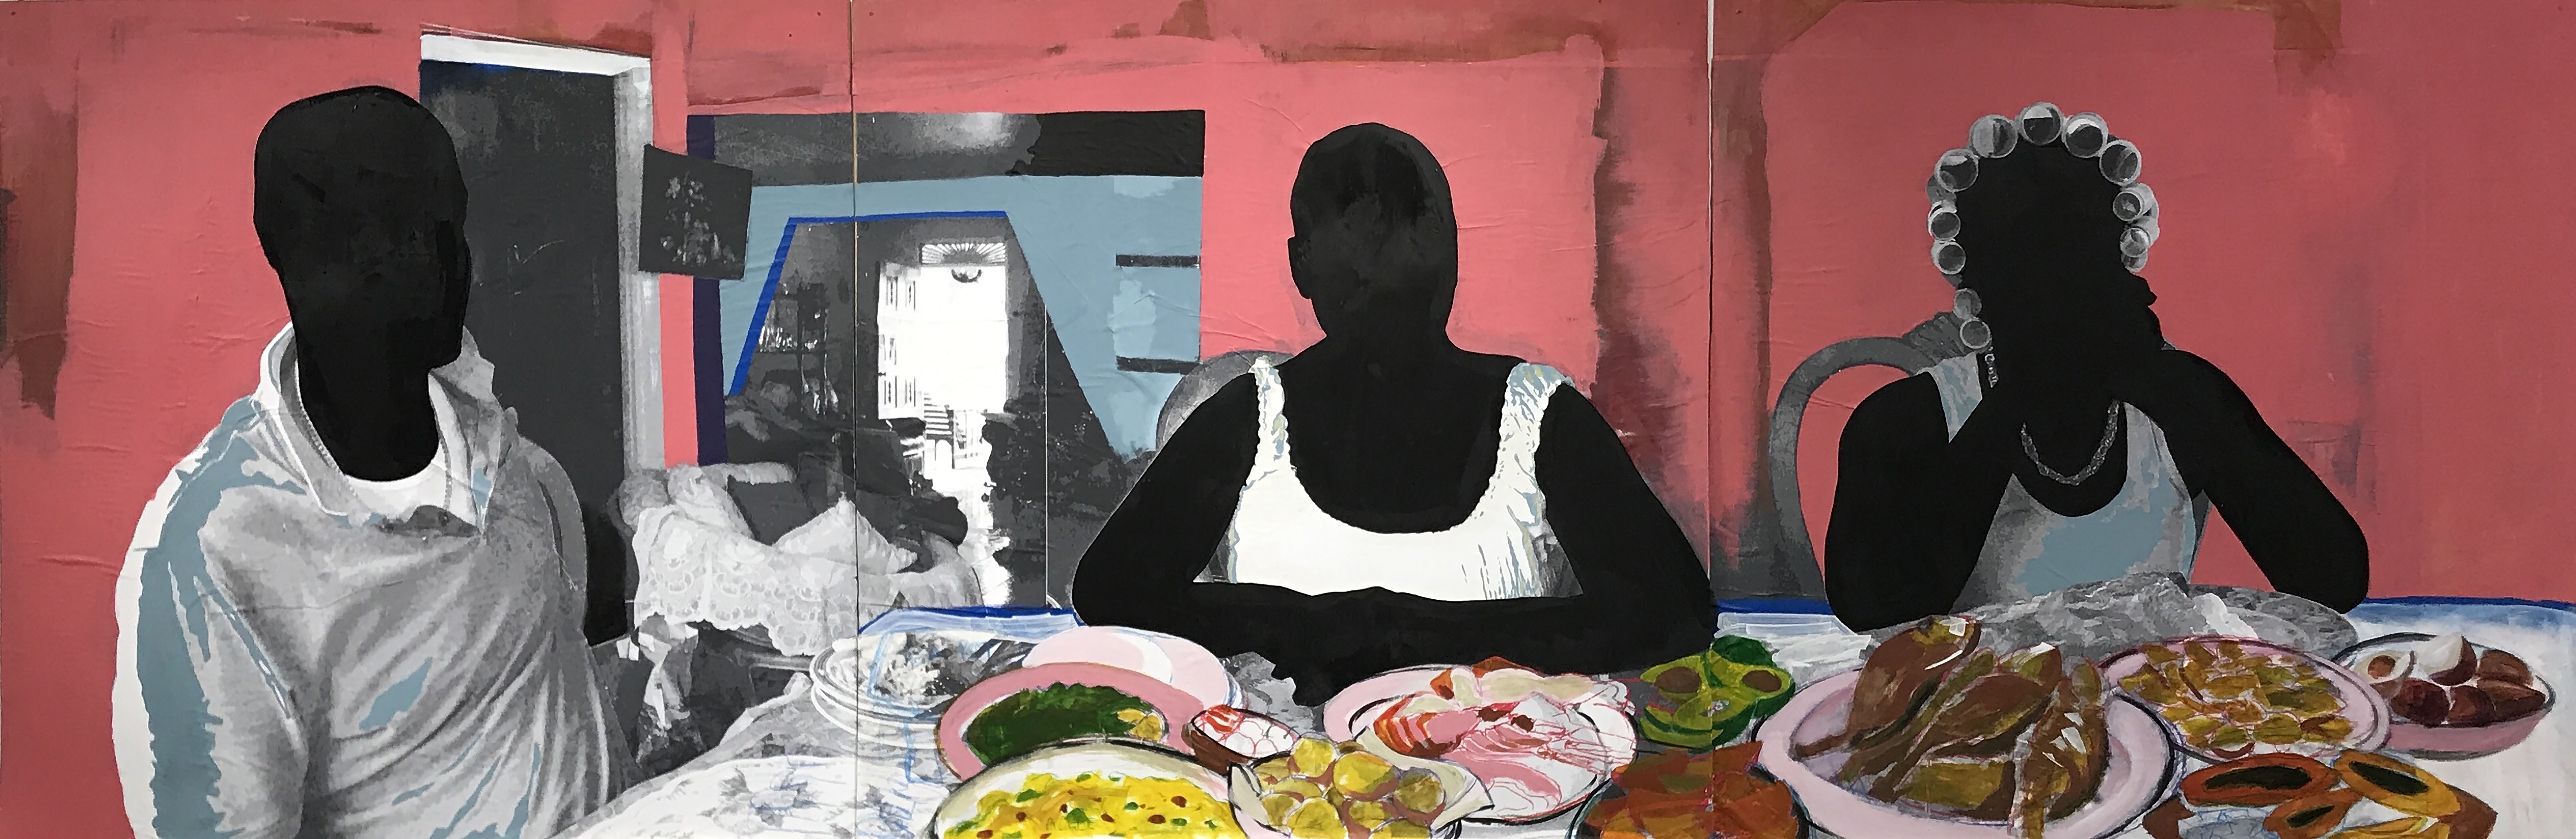 A mixed-media artwork of people sitting at a table.